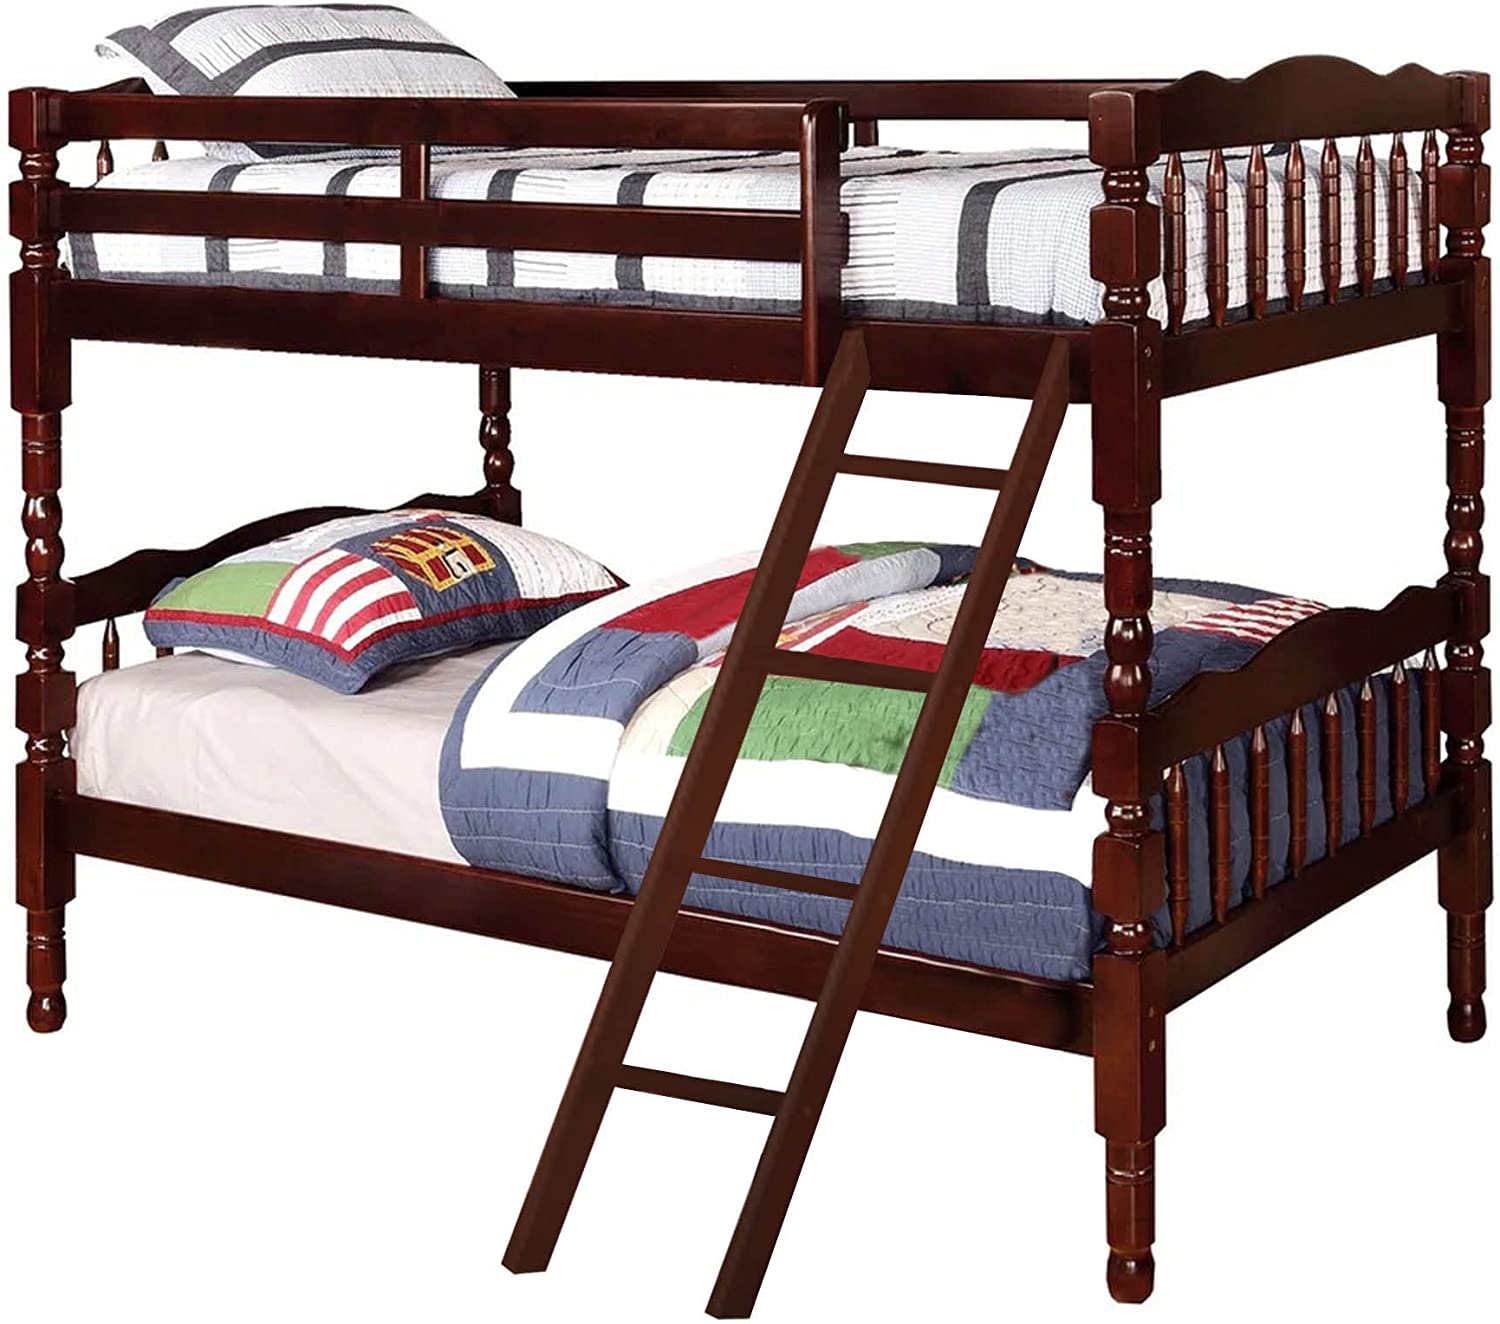 Better Home Products Charlotte Twin Over Twin Solid Wood Bunk Bed in Tobacco